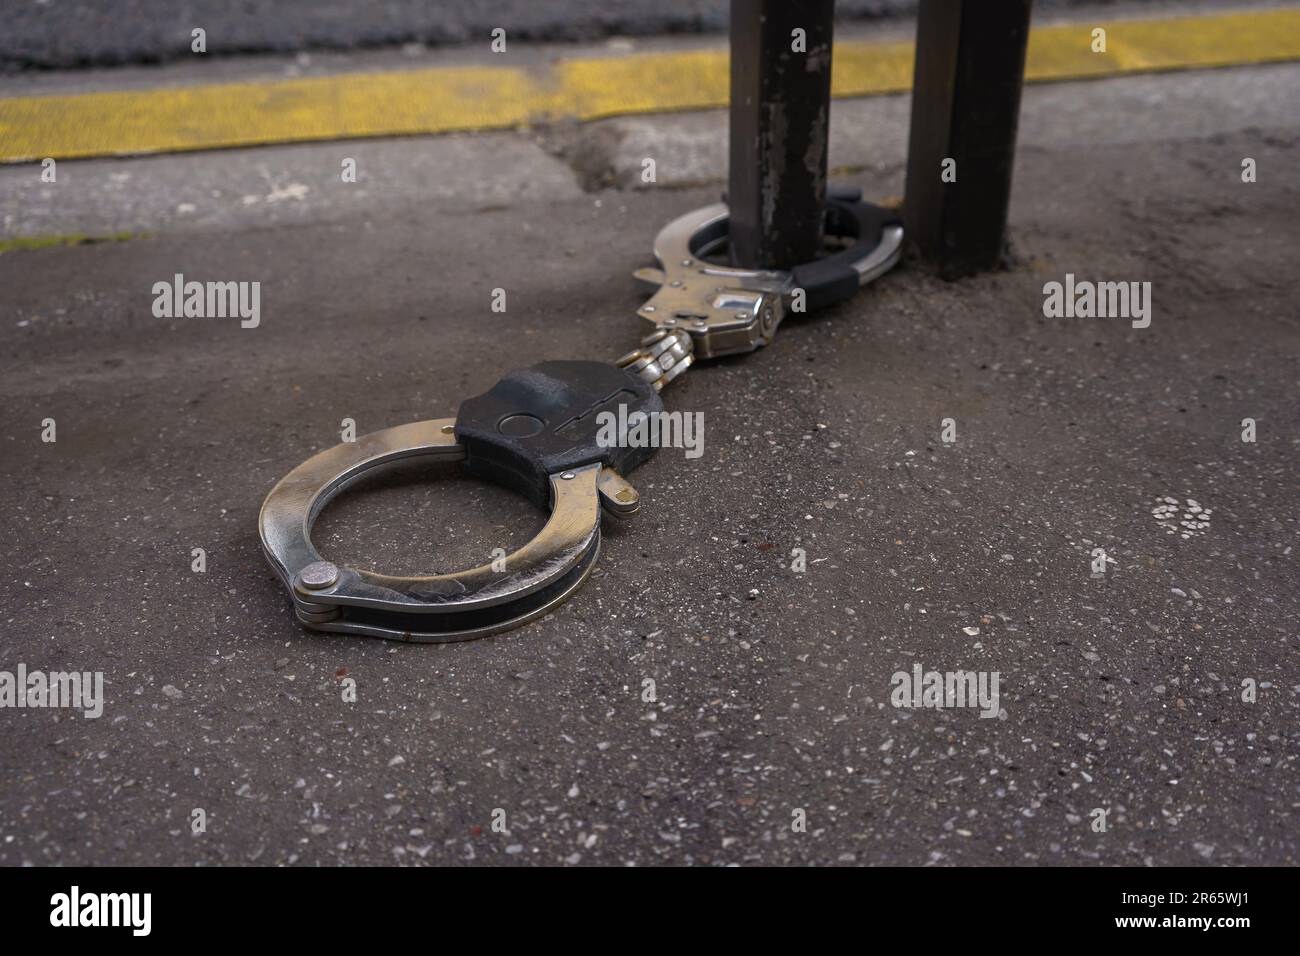 Handcuffs on pavement, attached to a metal railing on the street. Paris, France. Stock Photo